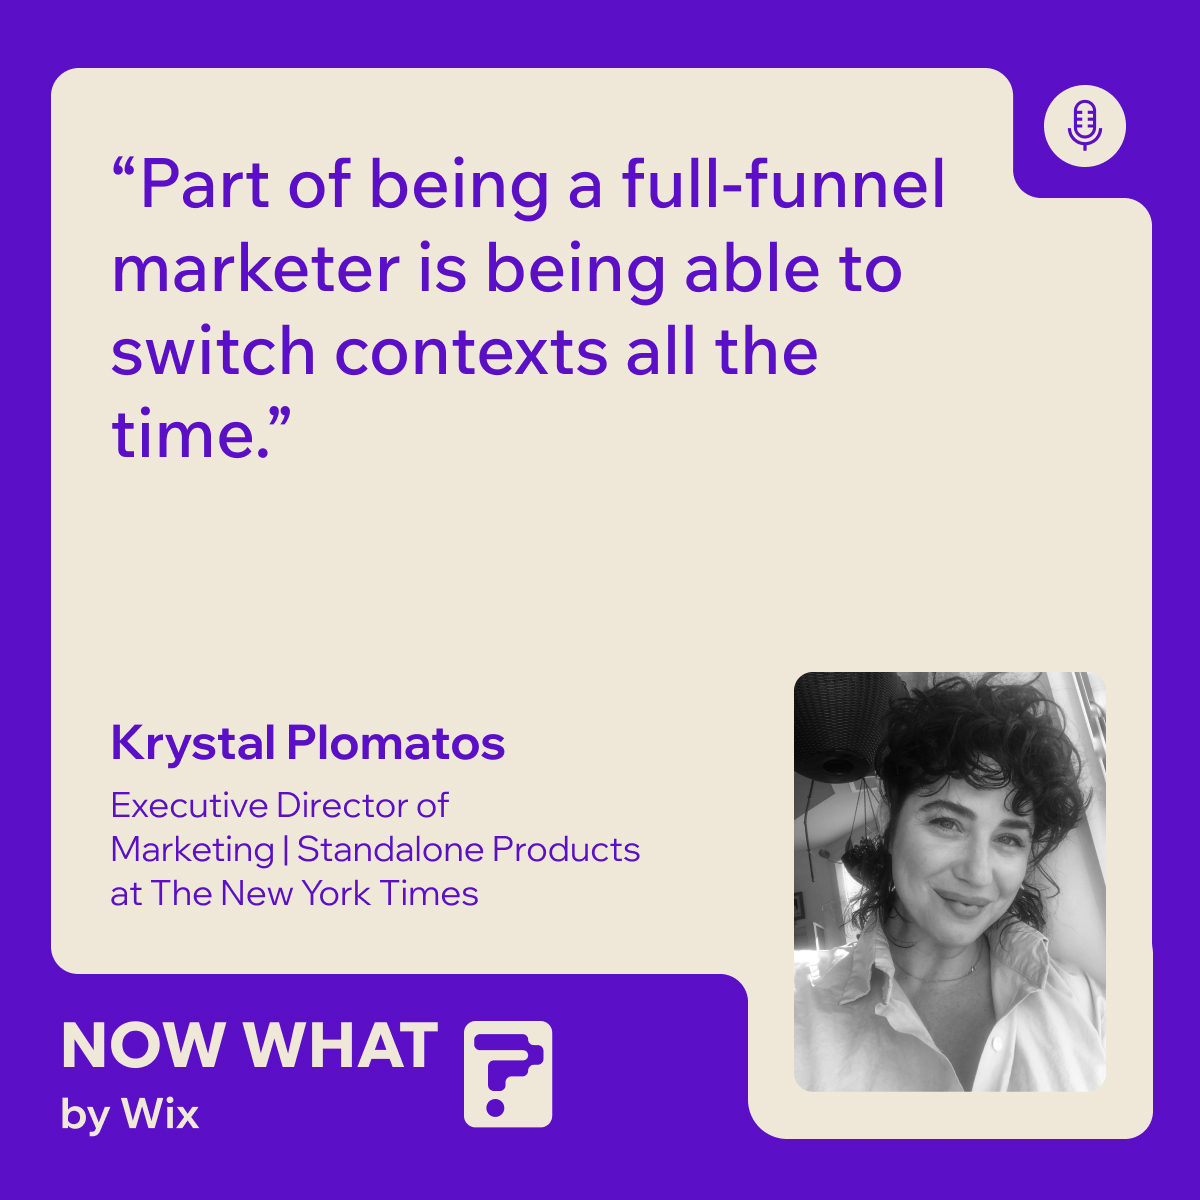 A quote by the New York Times's Executive Director of Marketing, Krystal Plomatos: "Part of being a full-funnel marketer is being able to switch contexts all the time." Photo of Plomatos and the Now What by Wix podcast logo which is a question mark. 